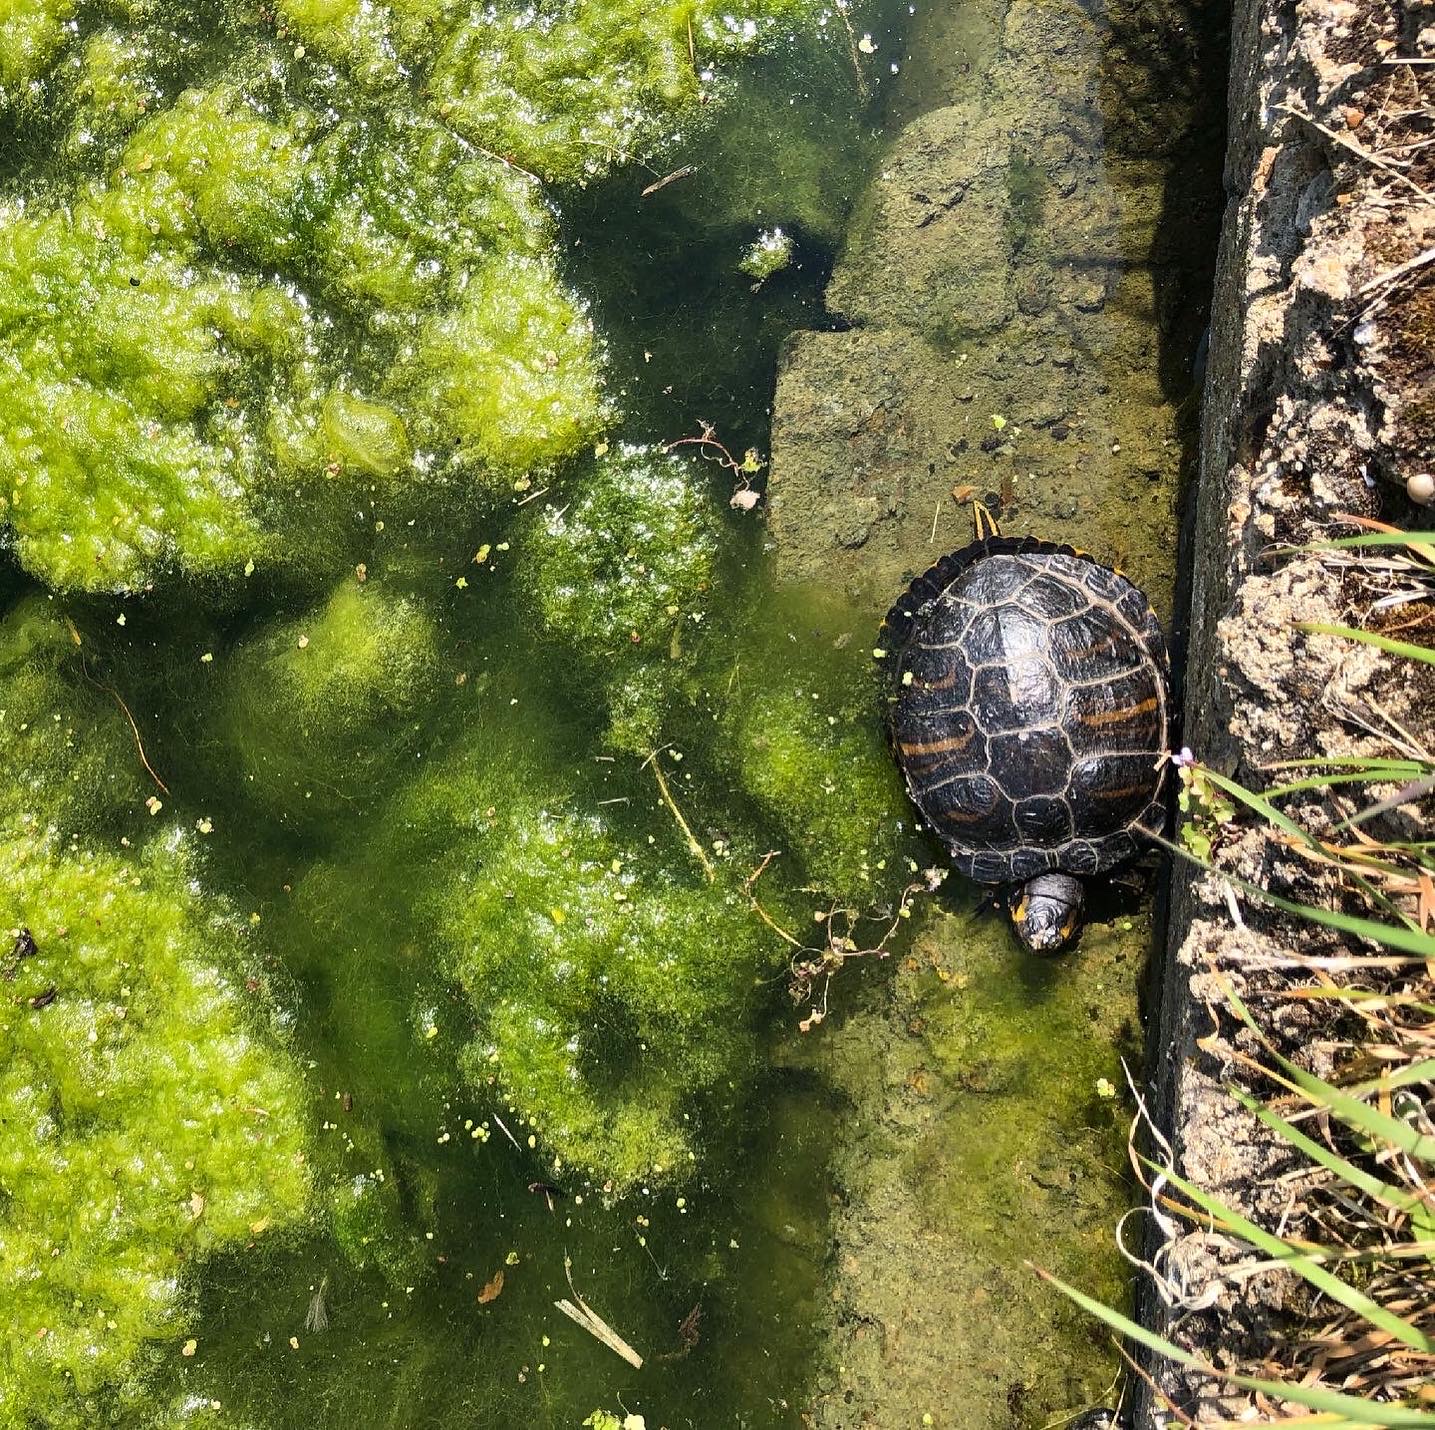 A turtle swimming in the Regent's Canal